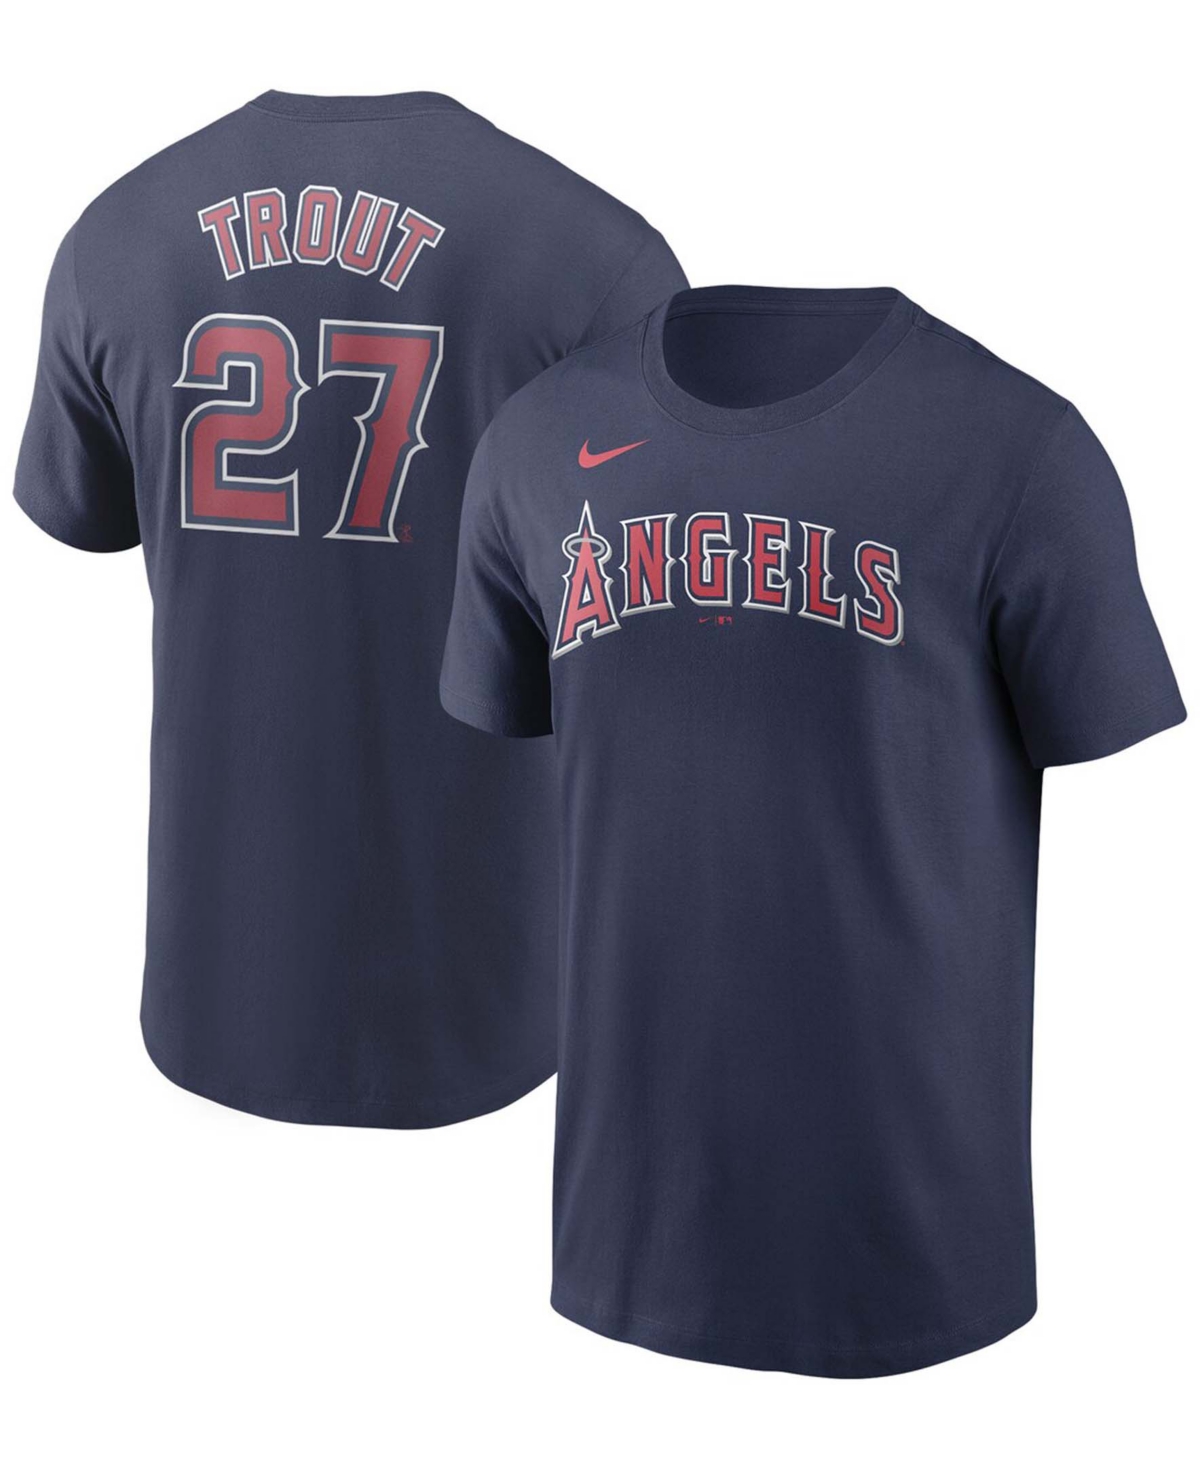 Men's Mike Trout Navy Los Angeles Angels Name Number T-shirt